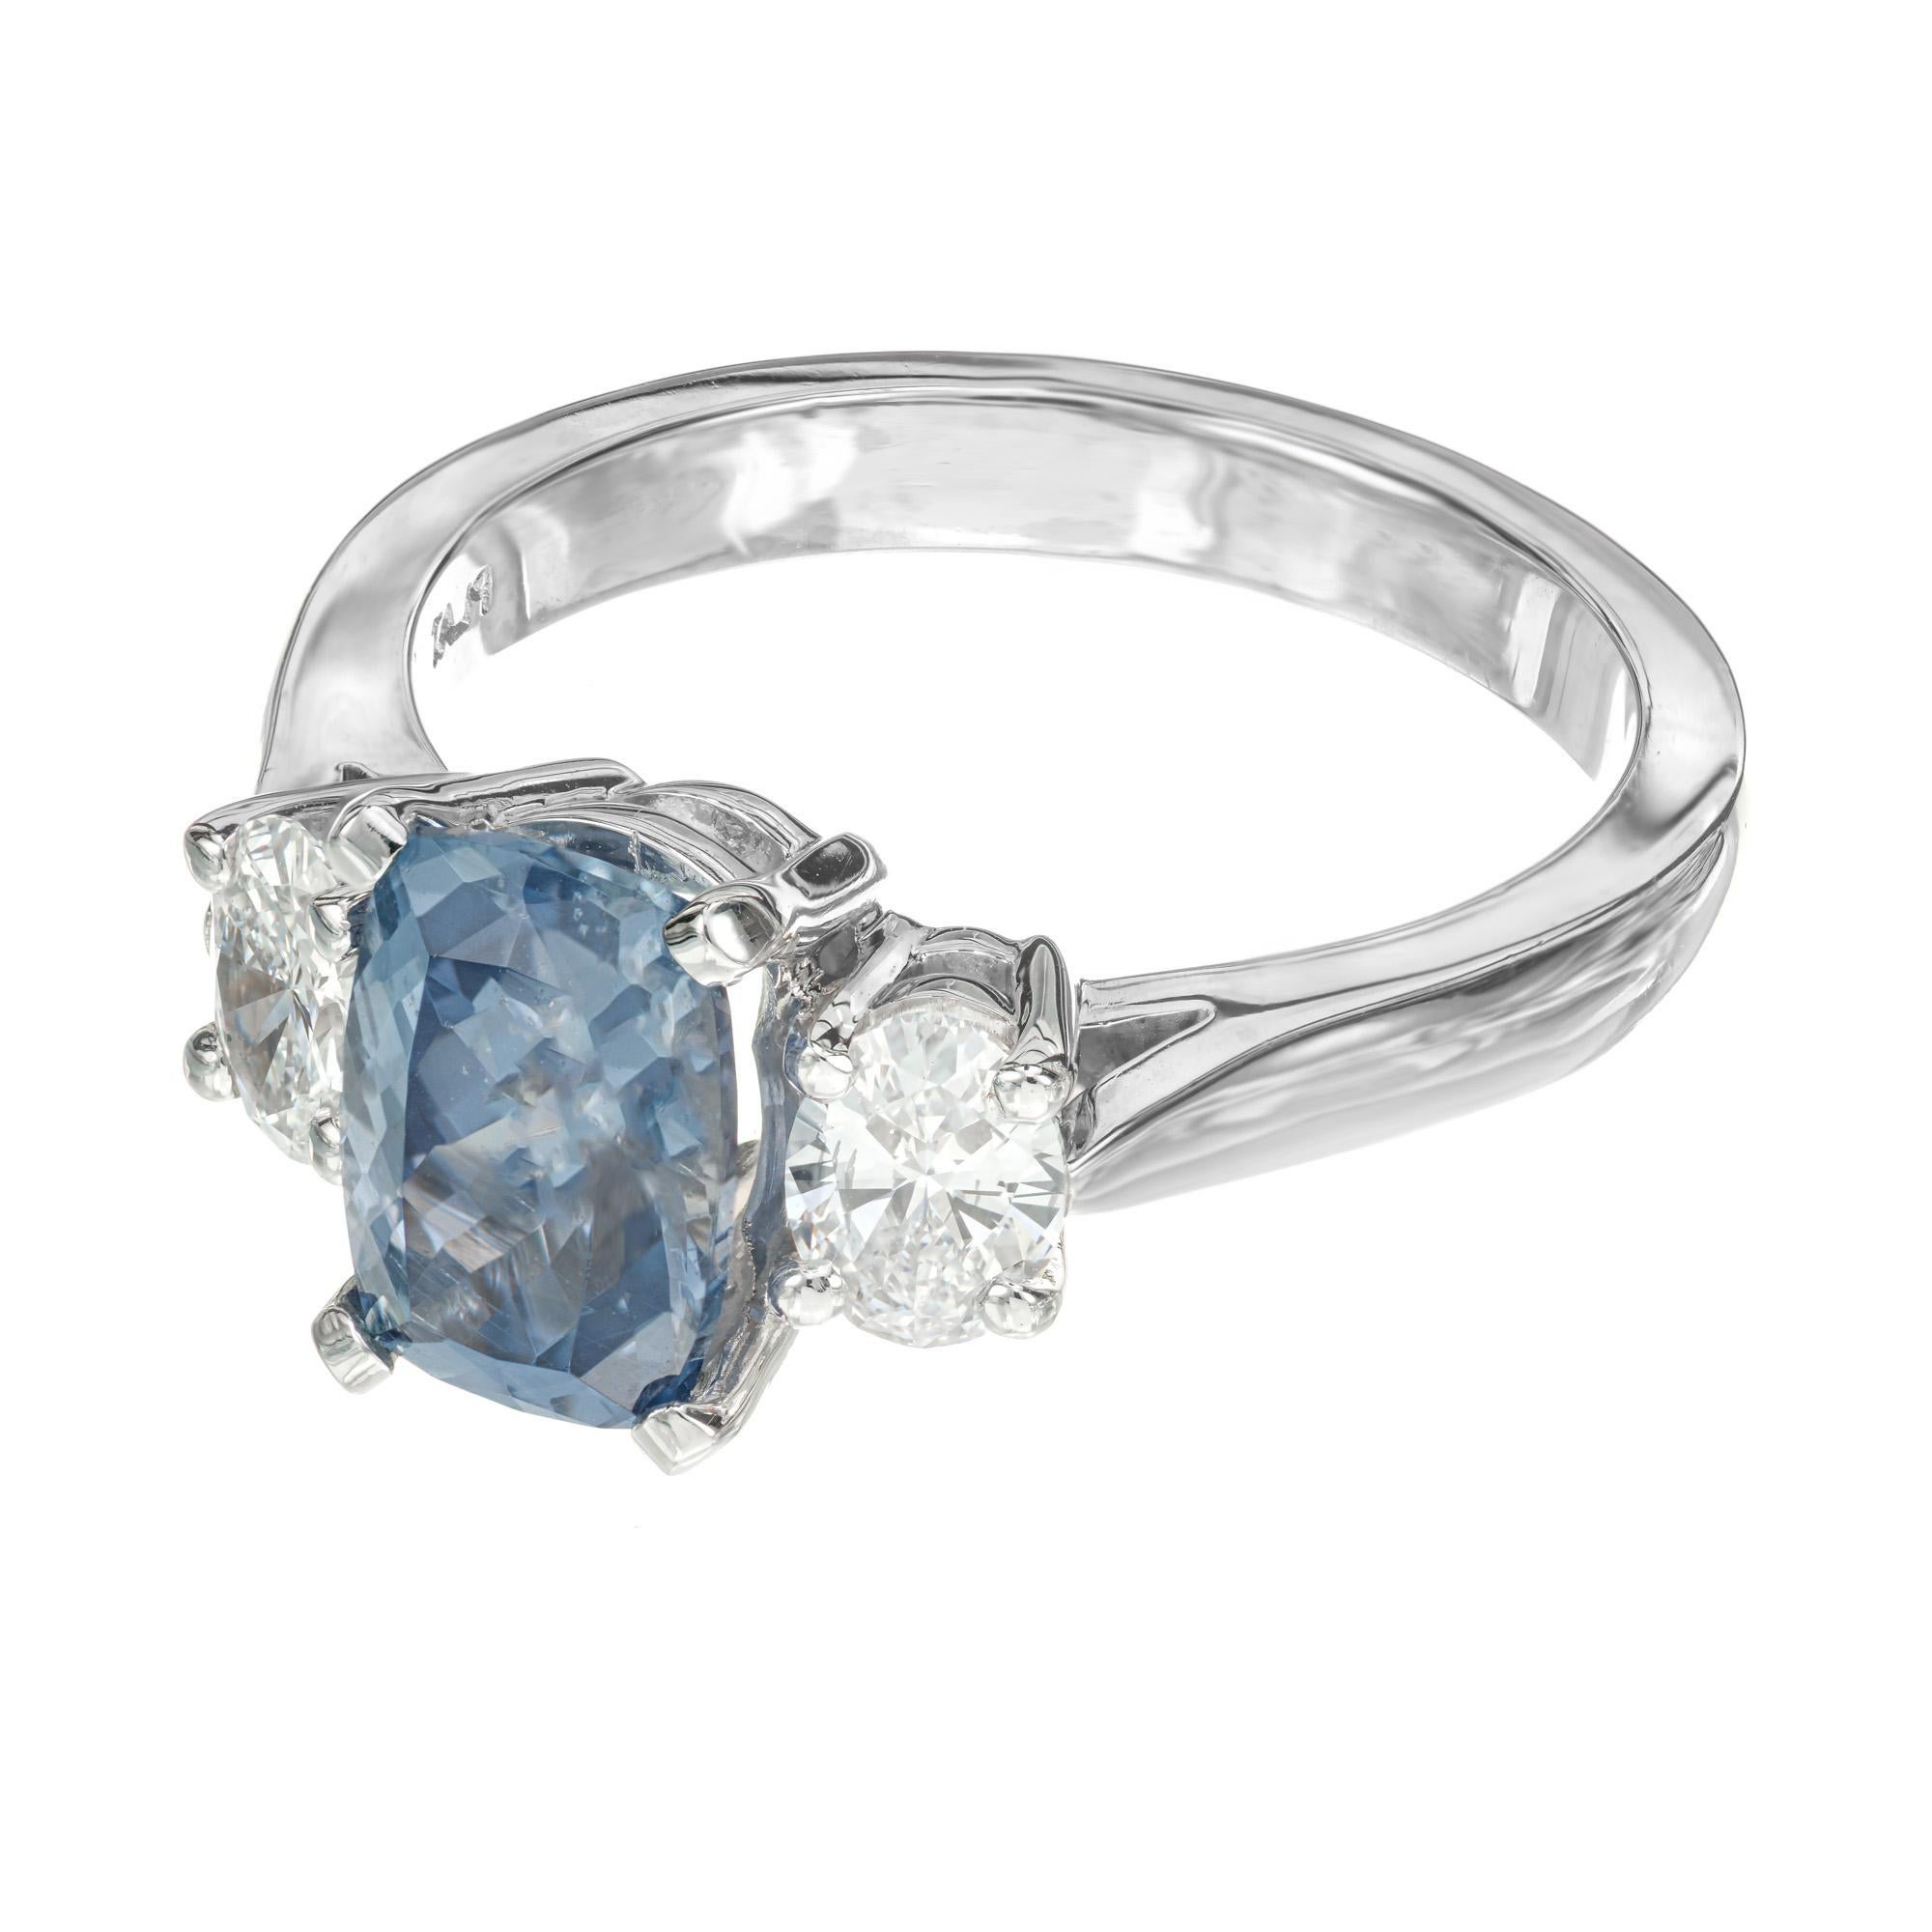 The centerpiece of this engagement ring is an oval natural grayish blue 2.23ct sapphire, which is certified by the GIA as natural, no heat. The sapphire is mounted in a platinum three-stone setting with one oval sparkling diamond on each side of the